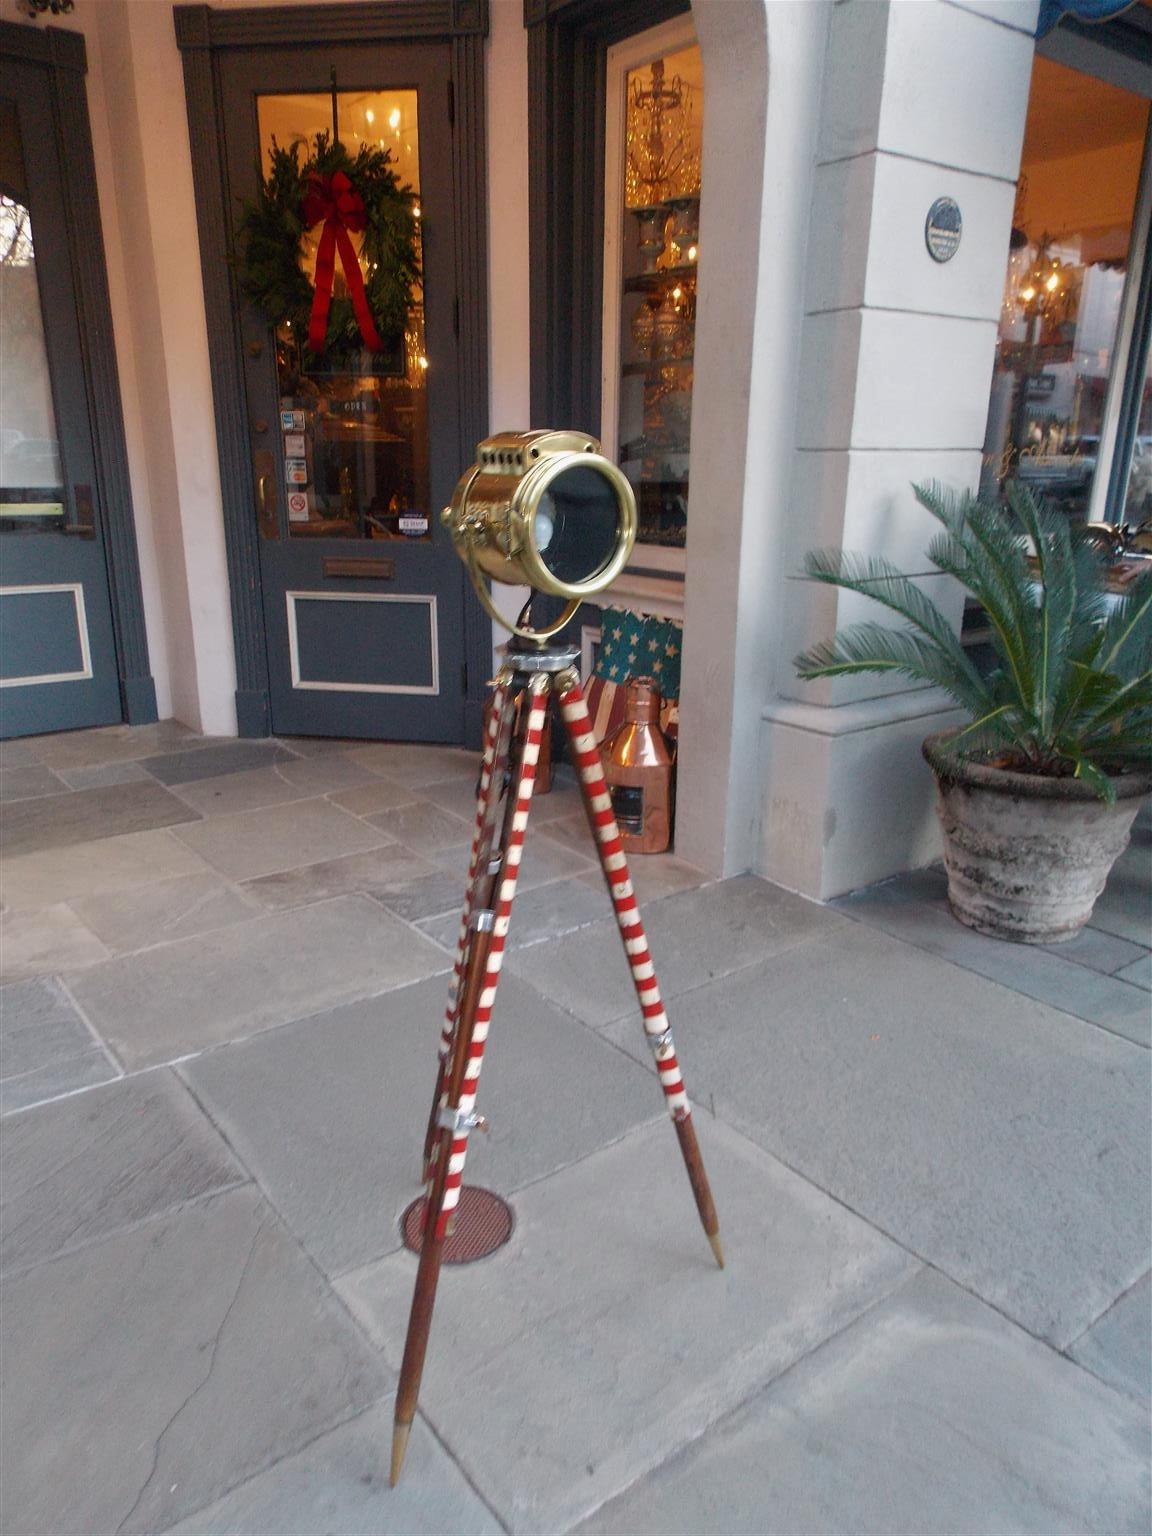 American brass Nautical Swivel spot light on telescopic barber pole tripod stand, Troy, NY. Late 19th century. Original candle and has been electrified.